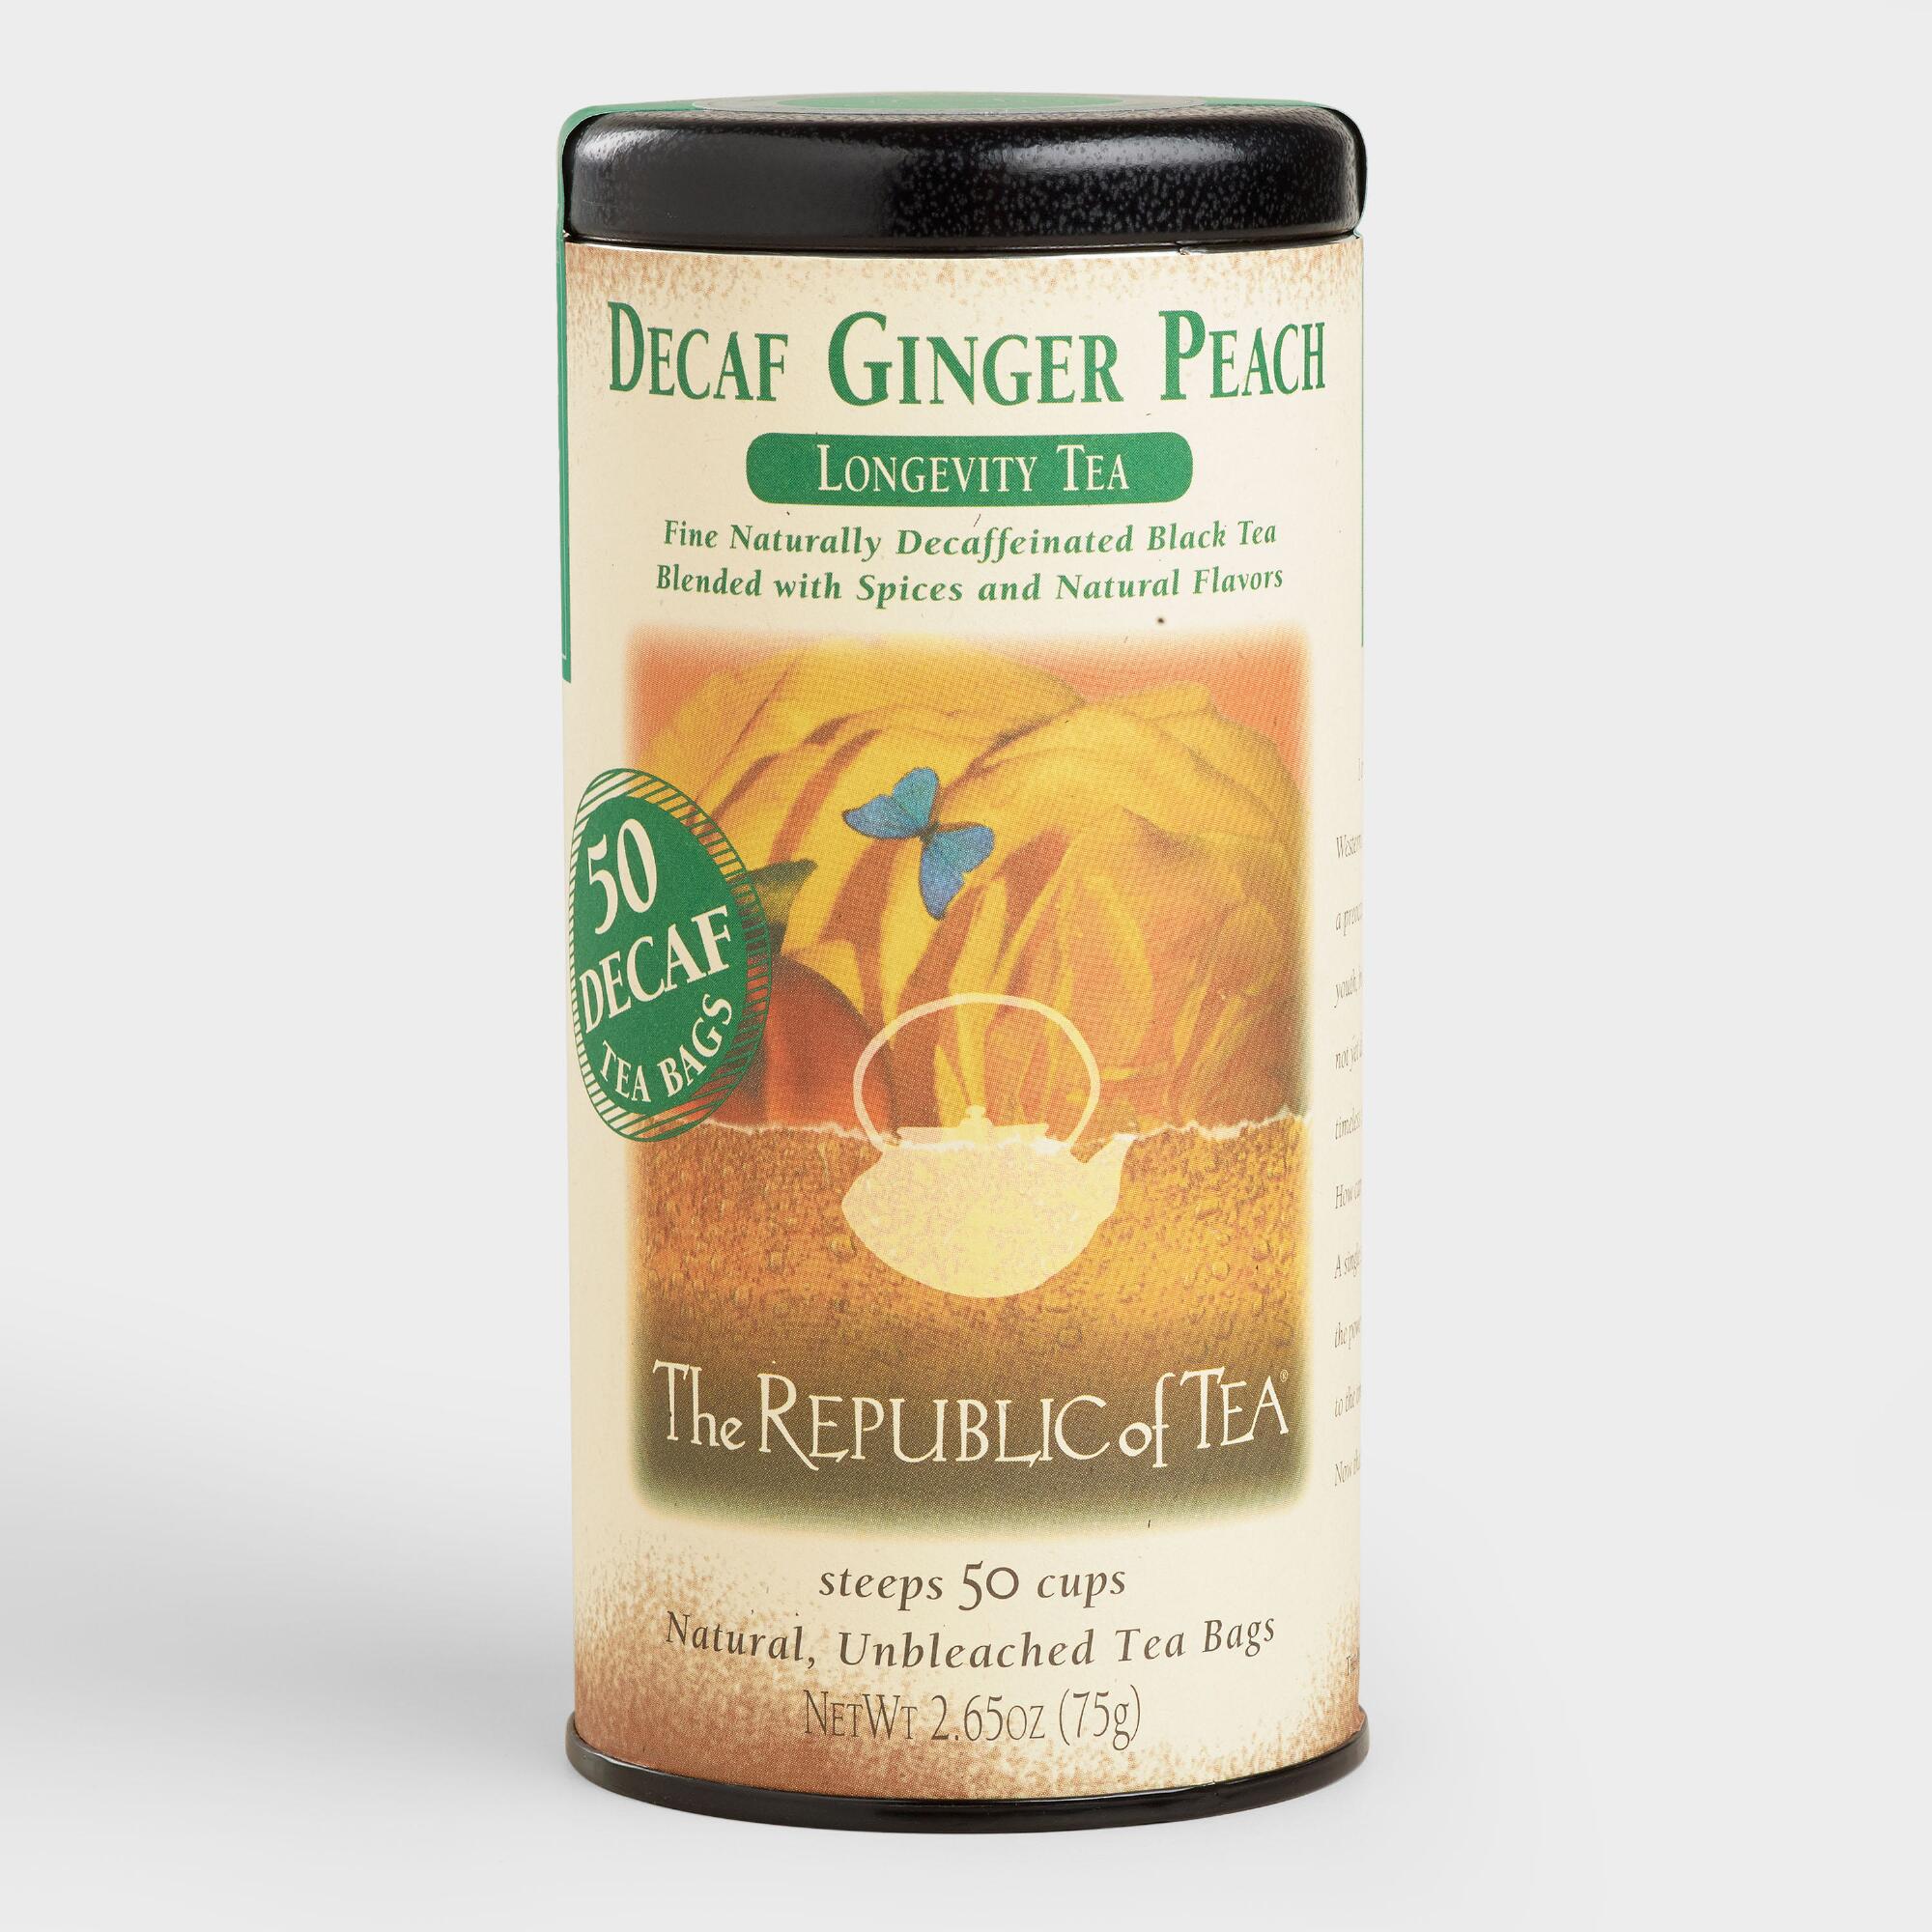 The Republic Of Tea Decaf Ginger Peach Black Tea 50 Count by World Market